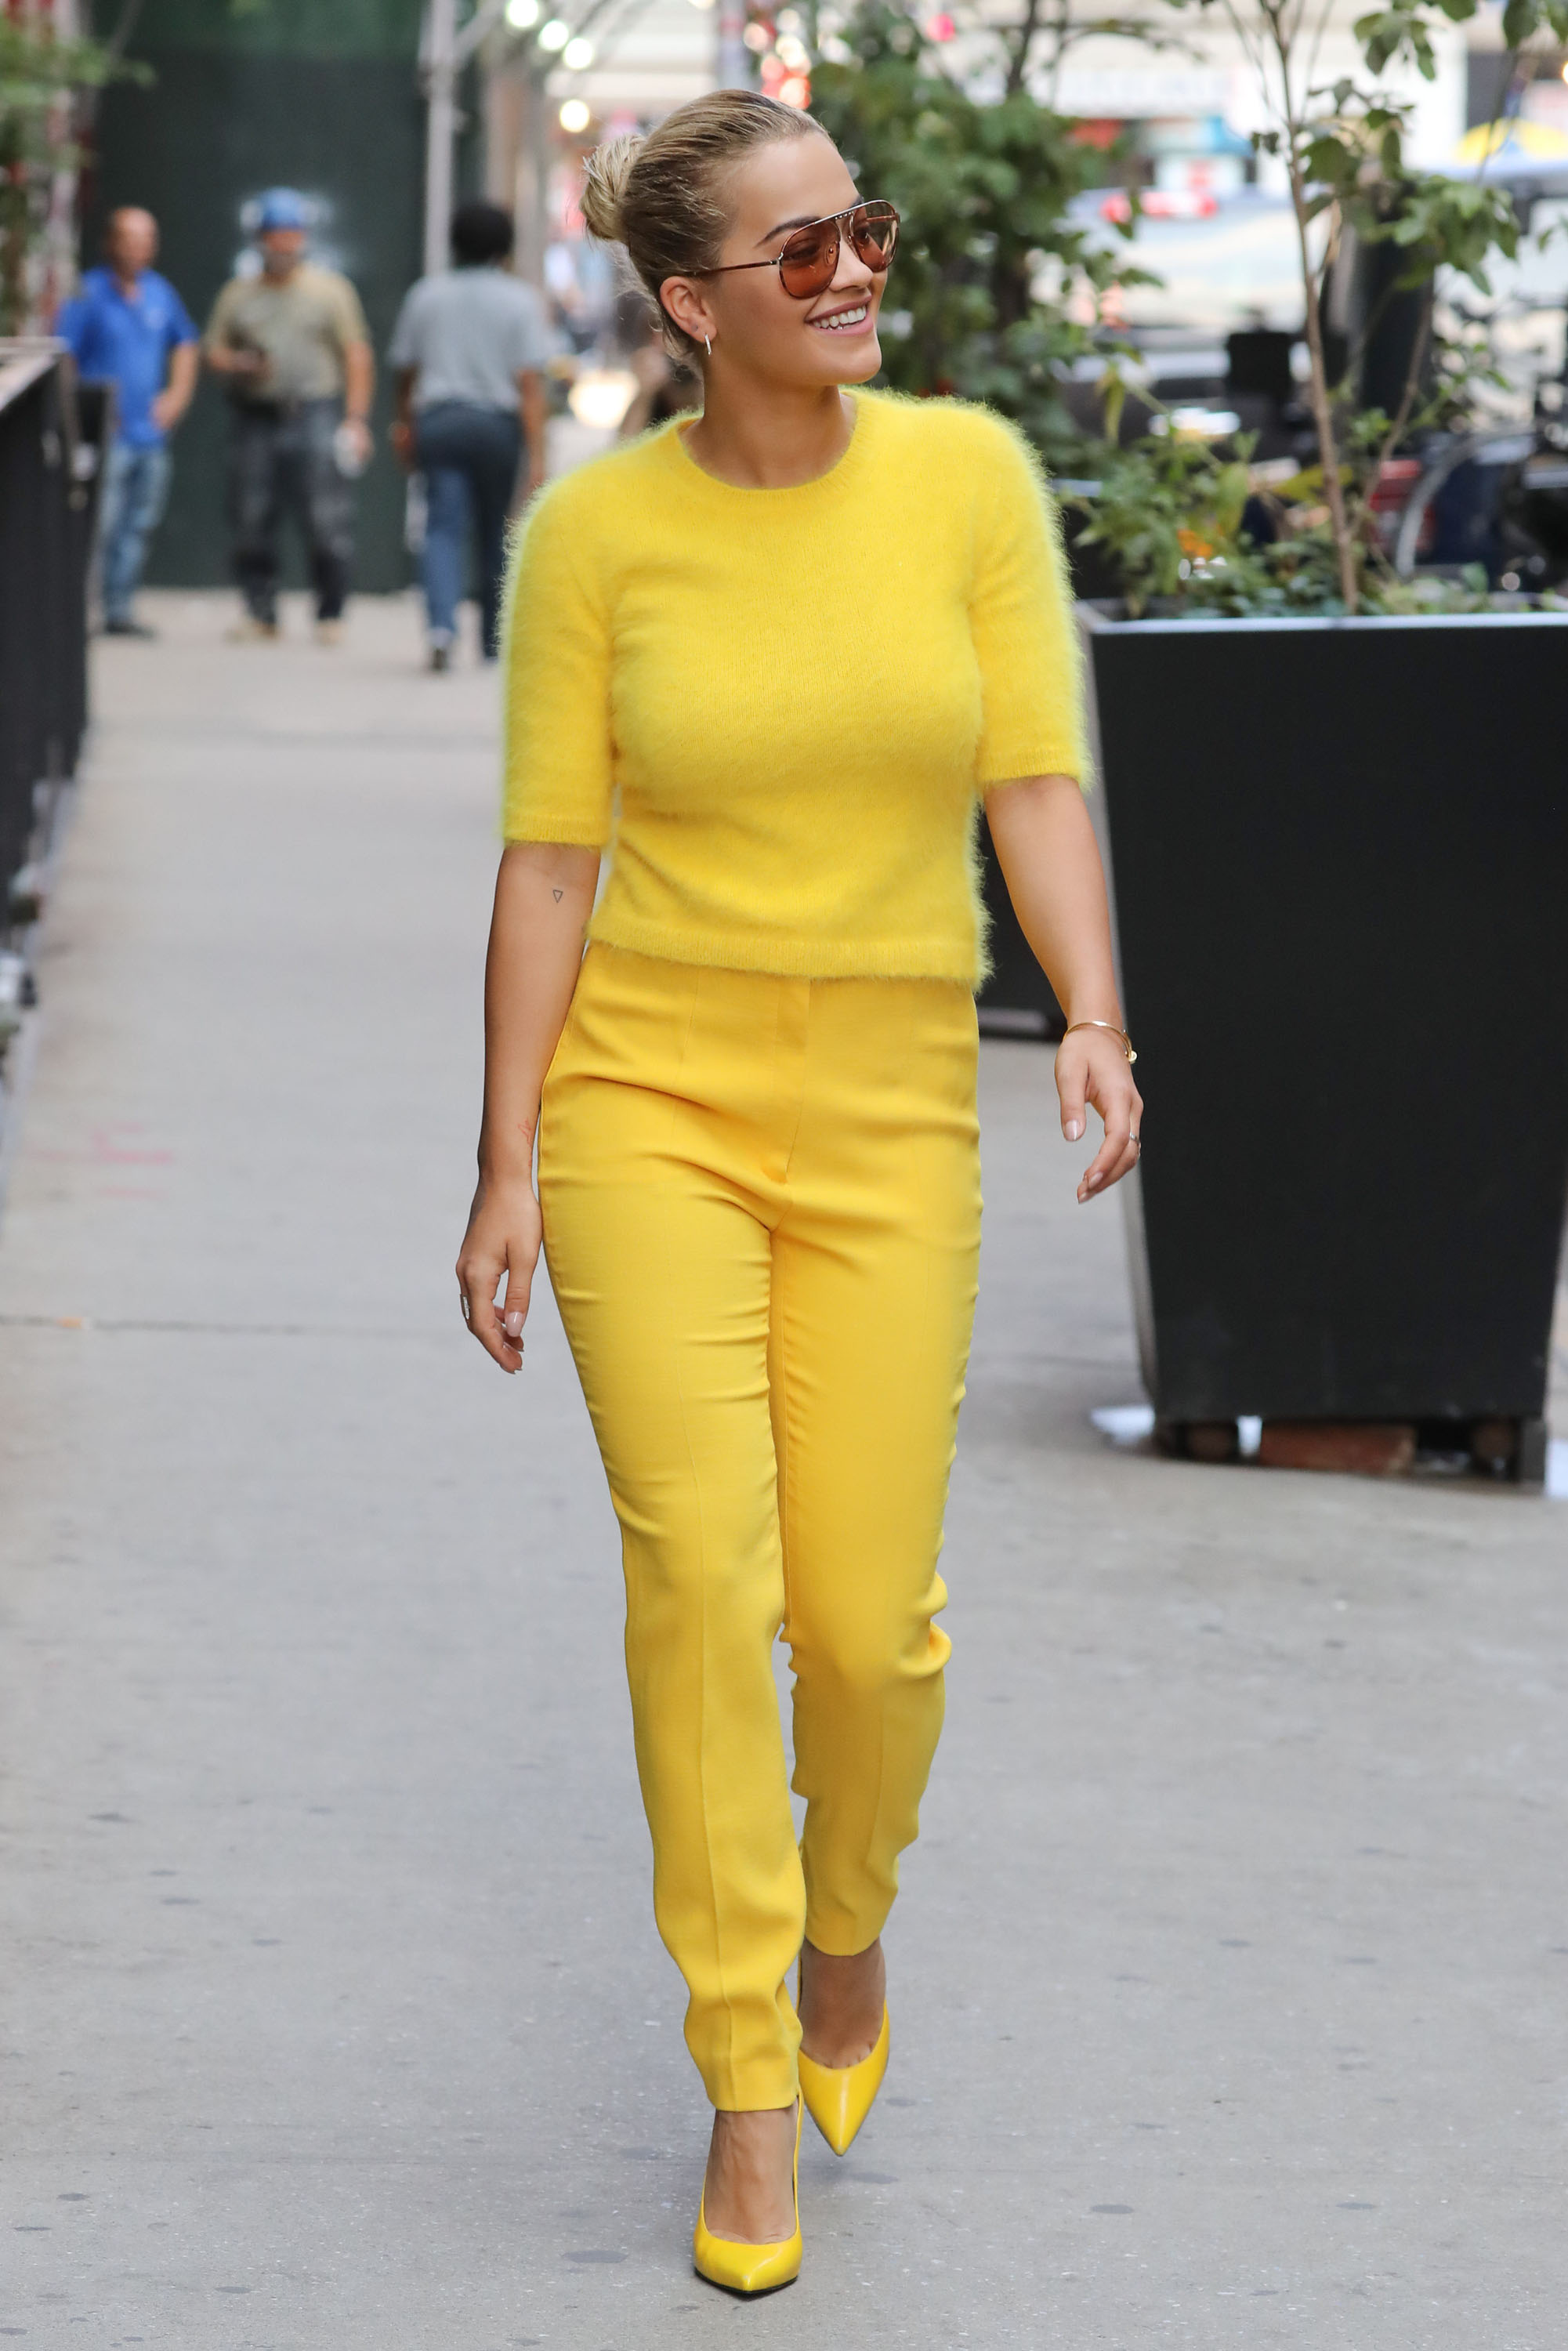 Rita Ora steps out dressed head to toe in yellow in New York City_03.jpg